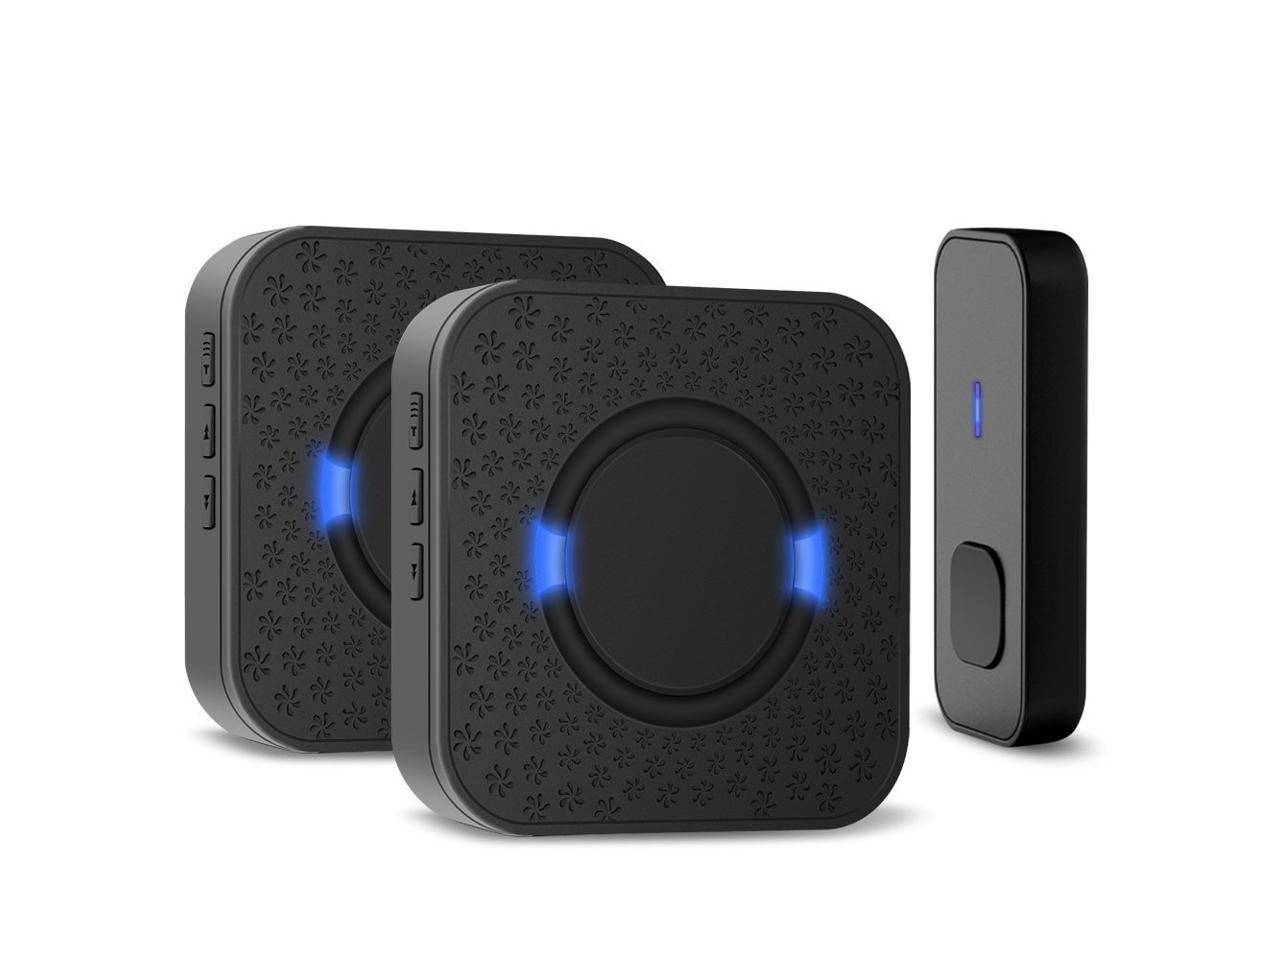 Details about   Wireless Doorbell Waterproof Chime Kit Operating to 900 ft 2 Receivers Black 